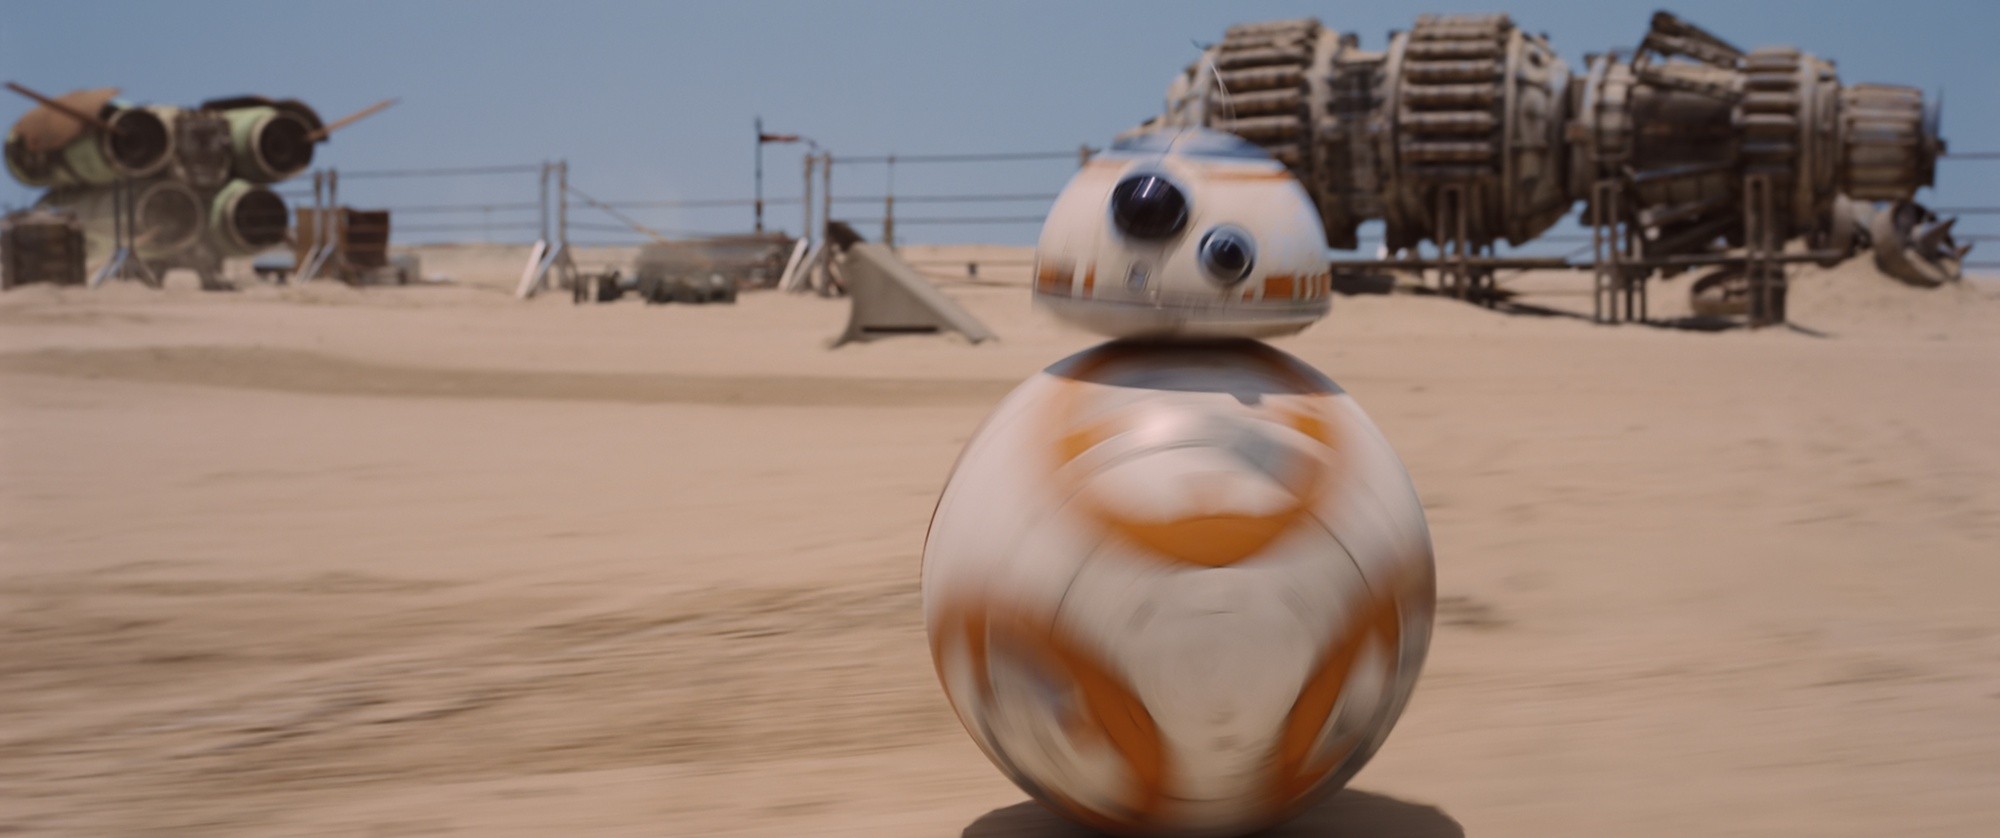 BB-8 from Walt Disney Pictures' Star Wars: The Force Awakens (2015)